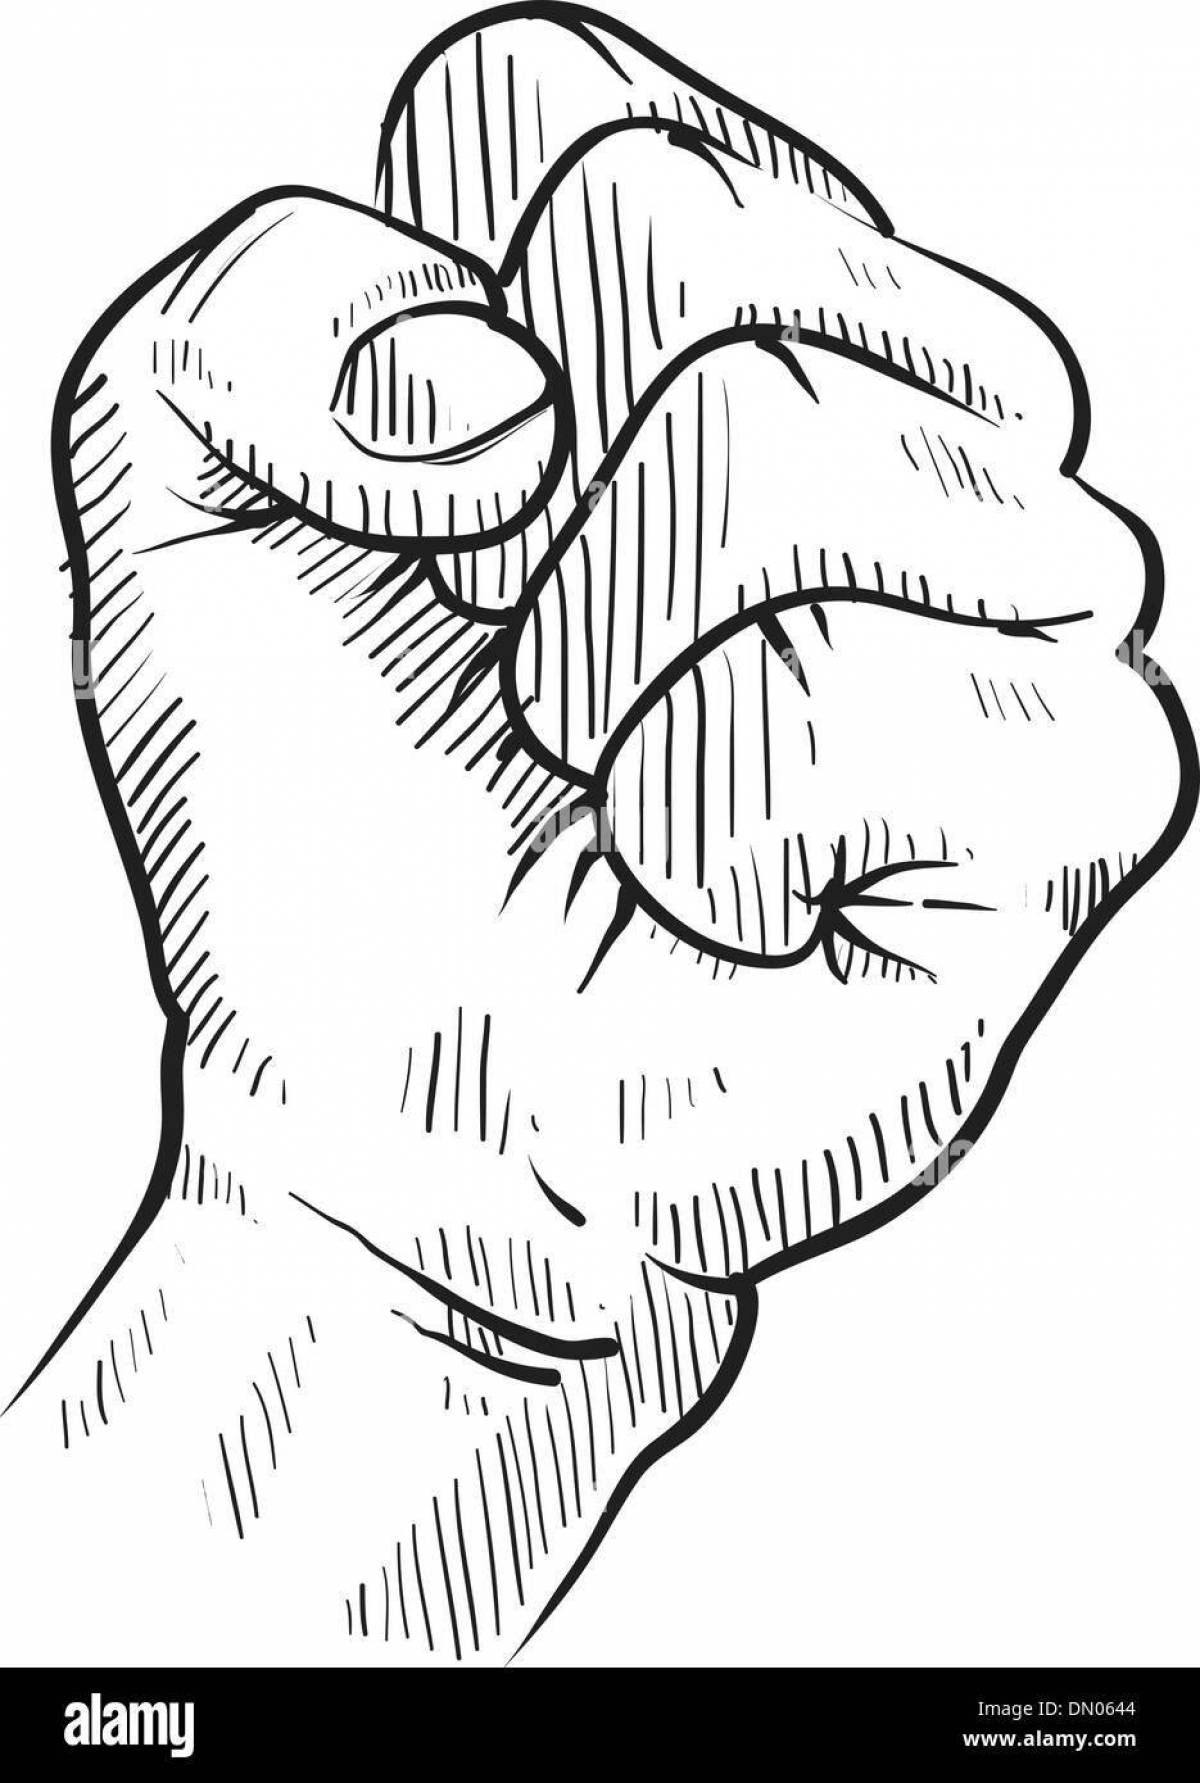 Monumental fist coloring page